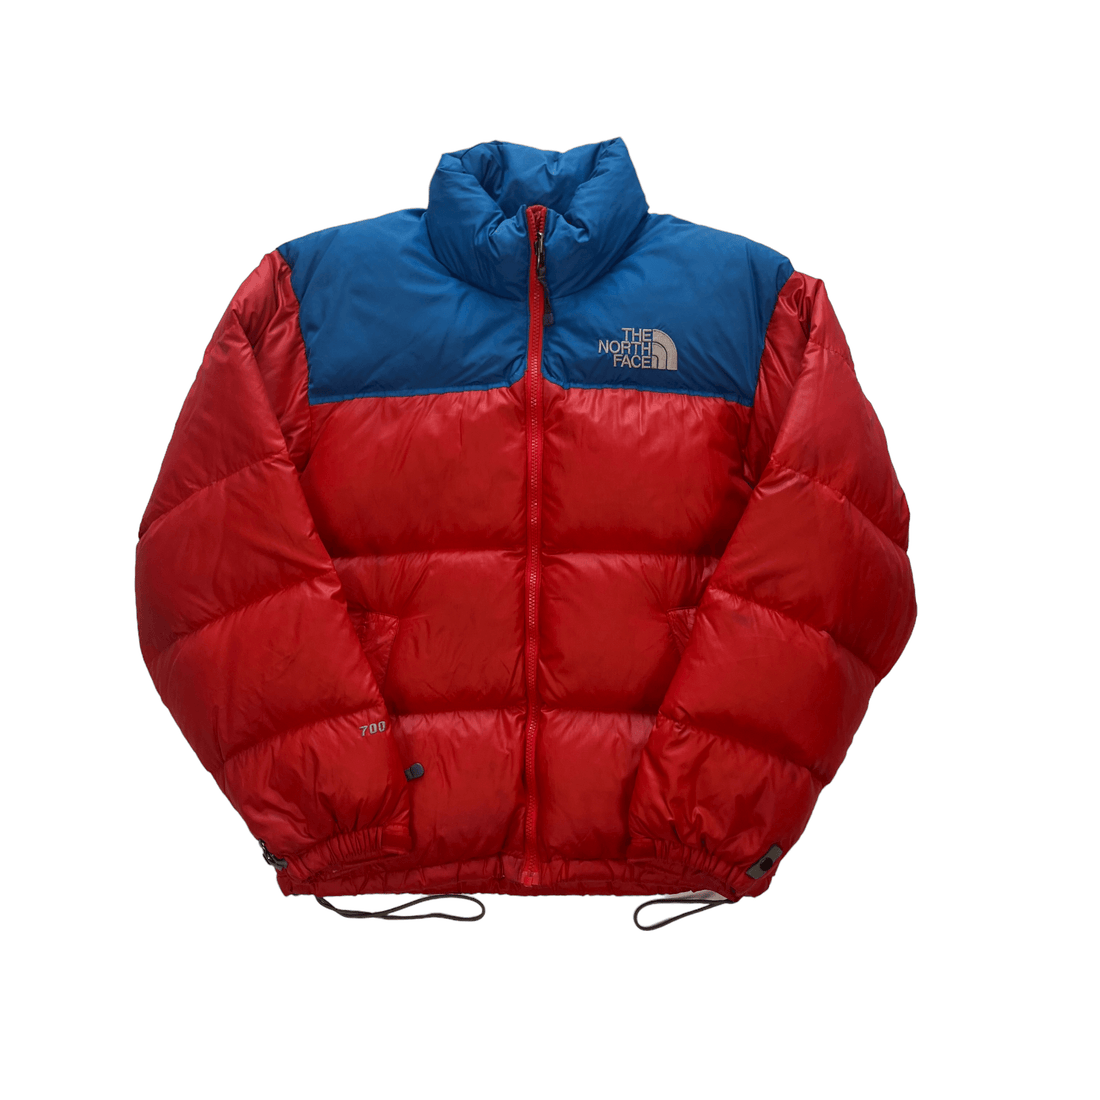 Vintage Red + Blue The North Face (TNF) Puffer Coat - Small - The Streetwear Studio